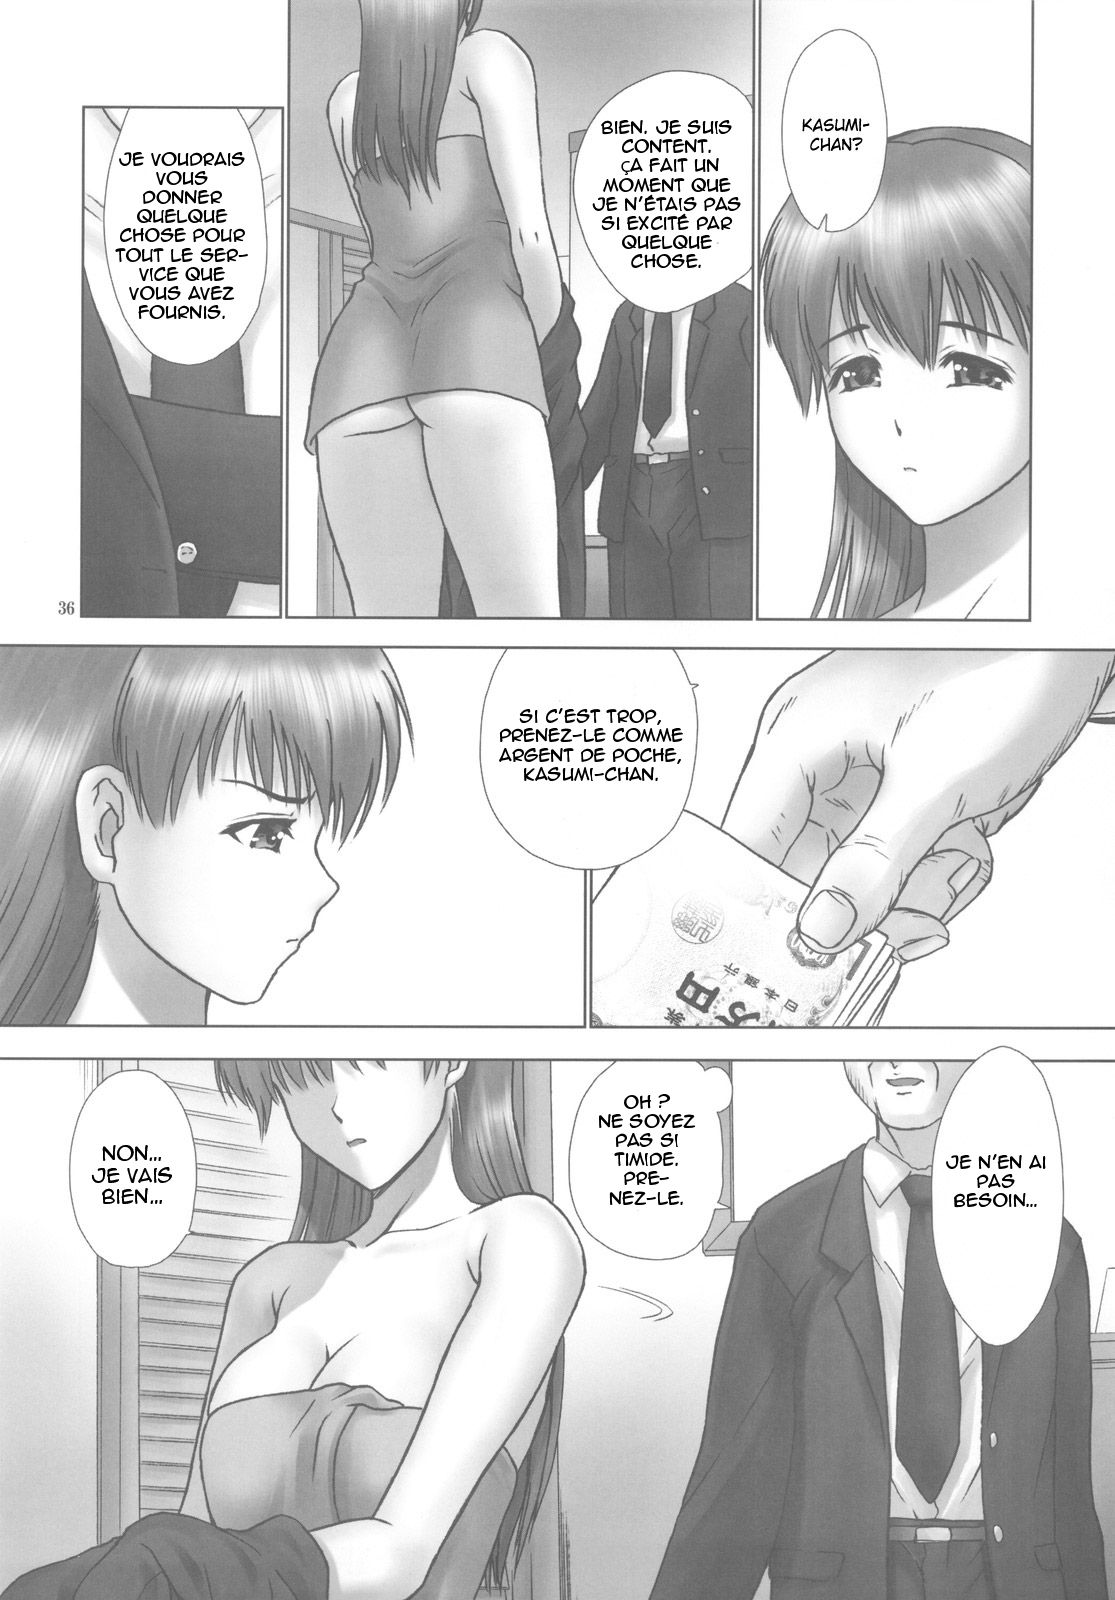 REI - slave to the grind - REI 07: CHAPTER 06 numero d'image 35